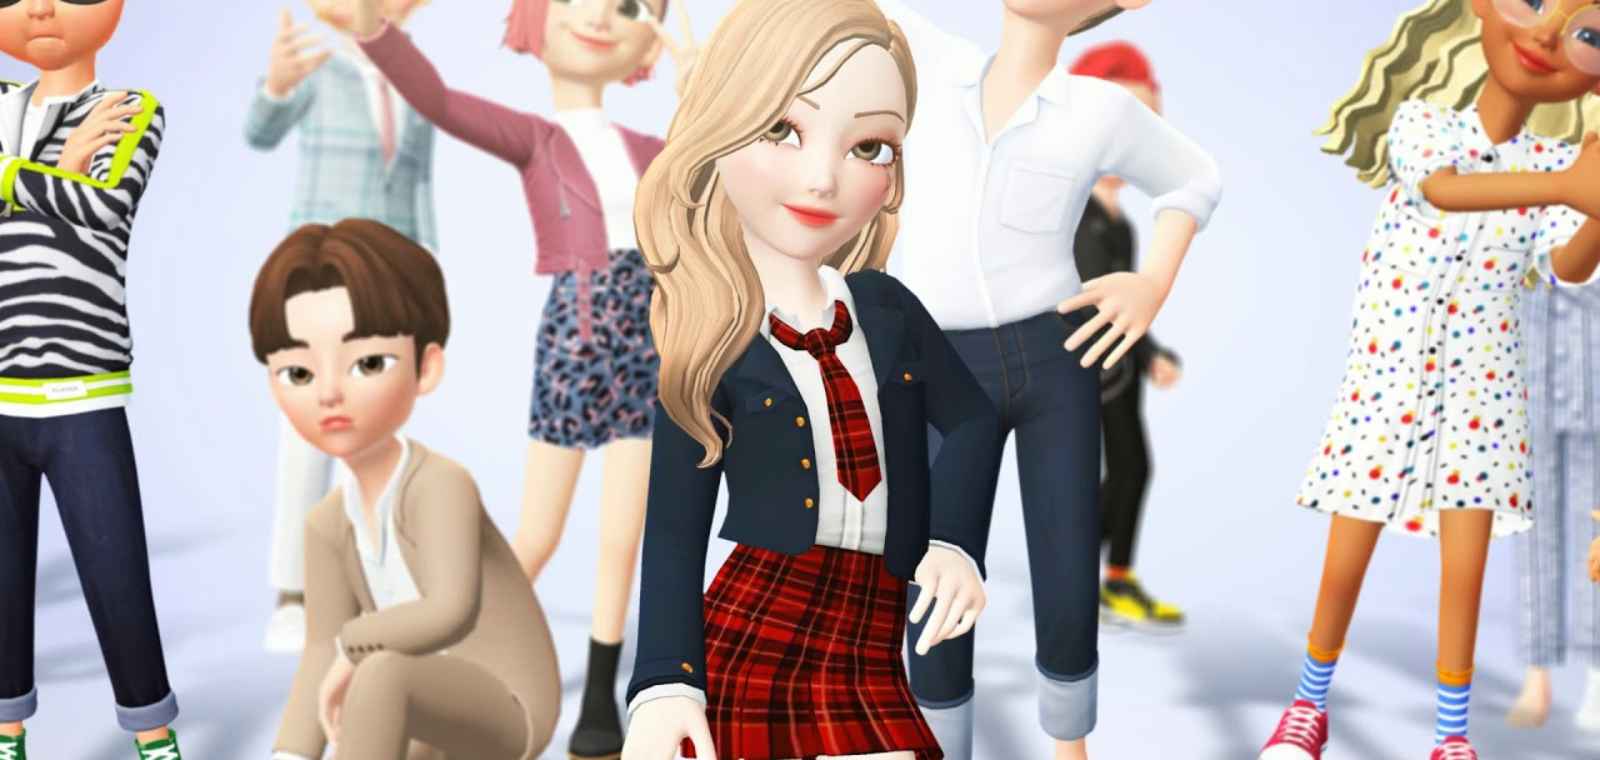 Zepeto Clone: Create Your Own Virtual Marketplace Where Fashion Meets the Metaverse